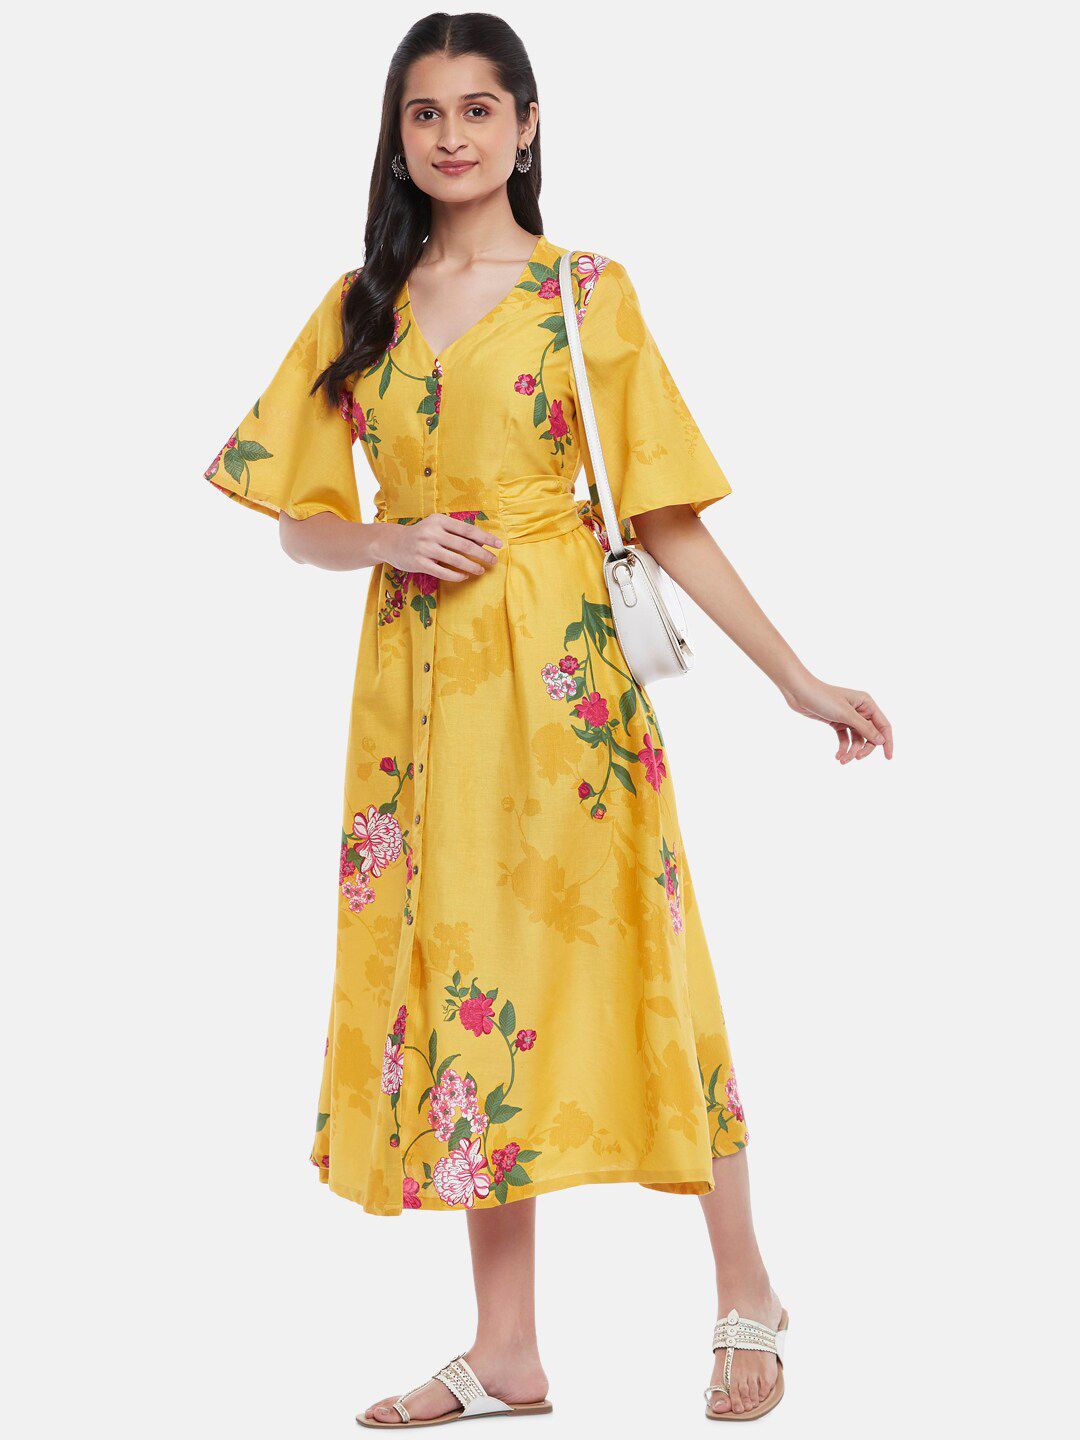 AKKRITI BY PANTALOONS Yellow & Magenta Floral A-Line Cotton Midi Dress Price in India